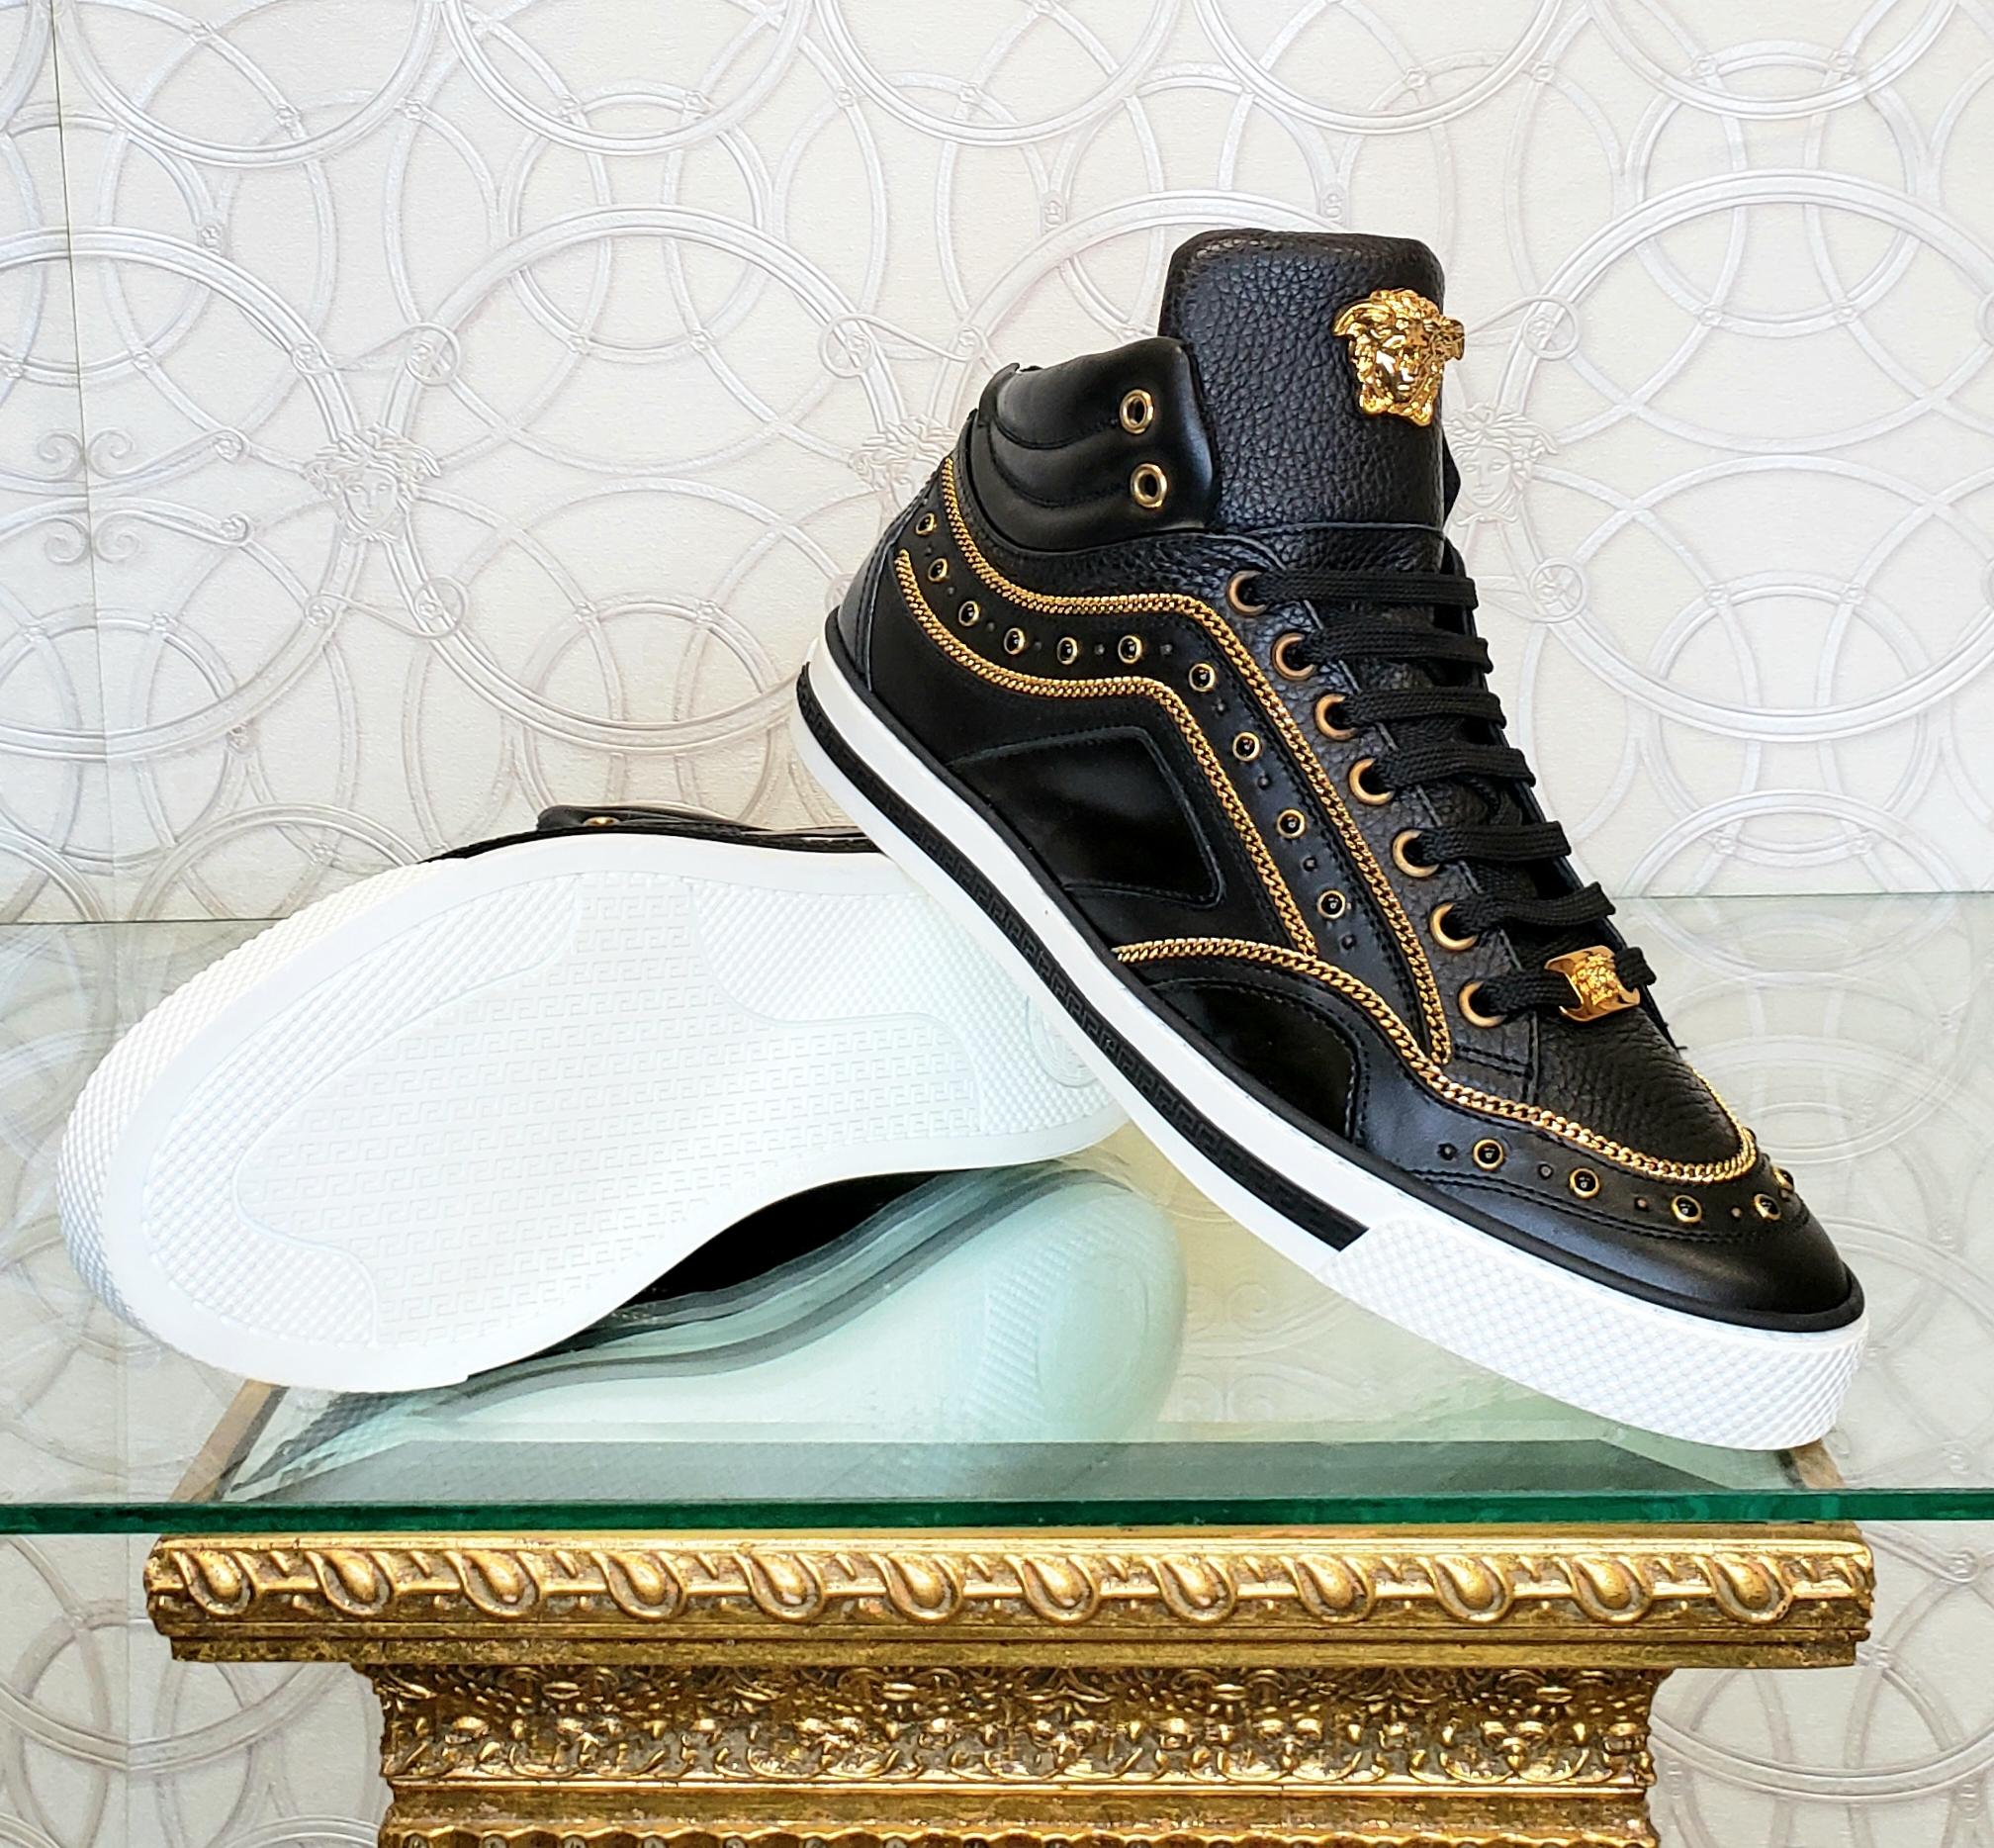 NEW VERSACE STUDDED HIGH-TOP SNEAKERS with GOLD 3D MEDUSA BUCKLE SIZE 43 - 10 1